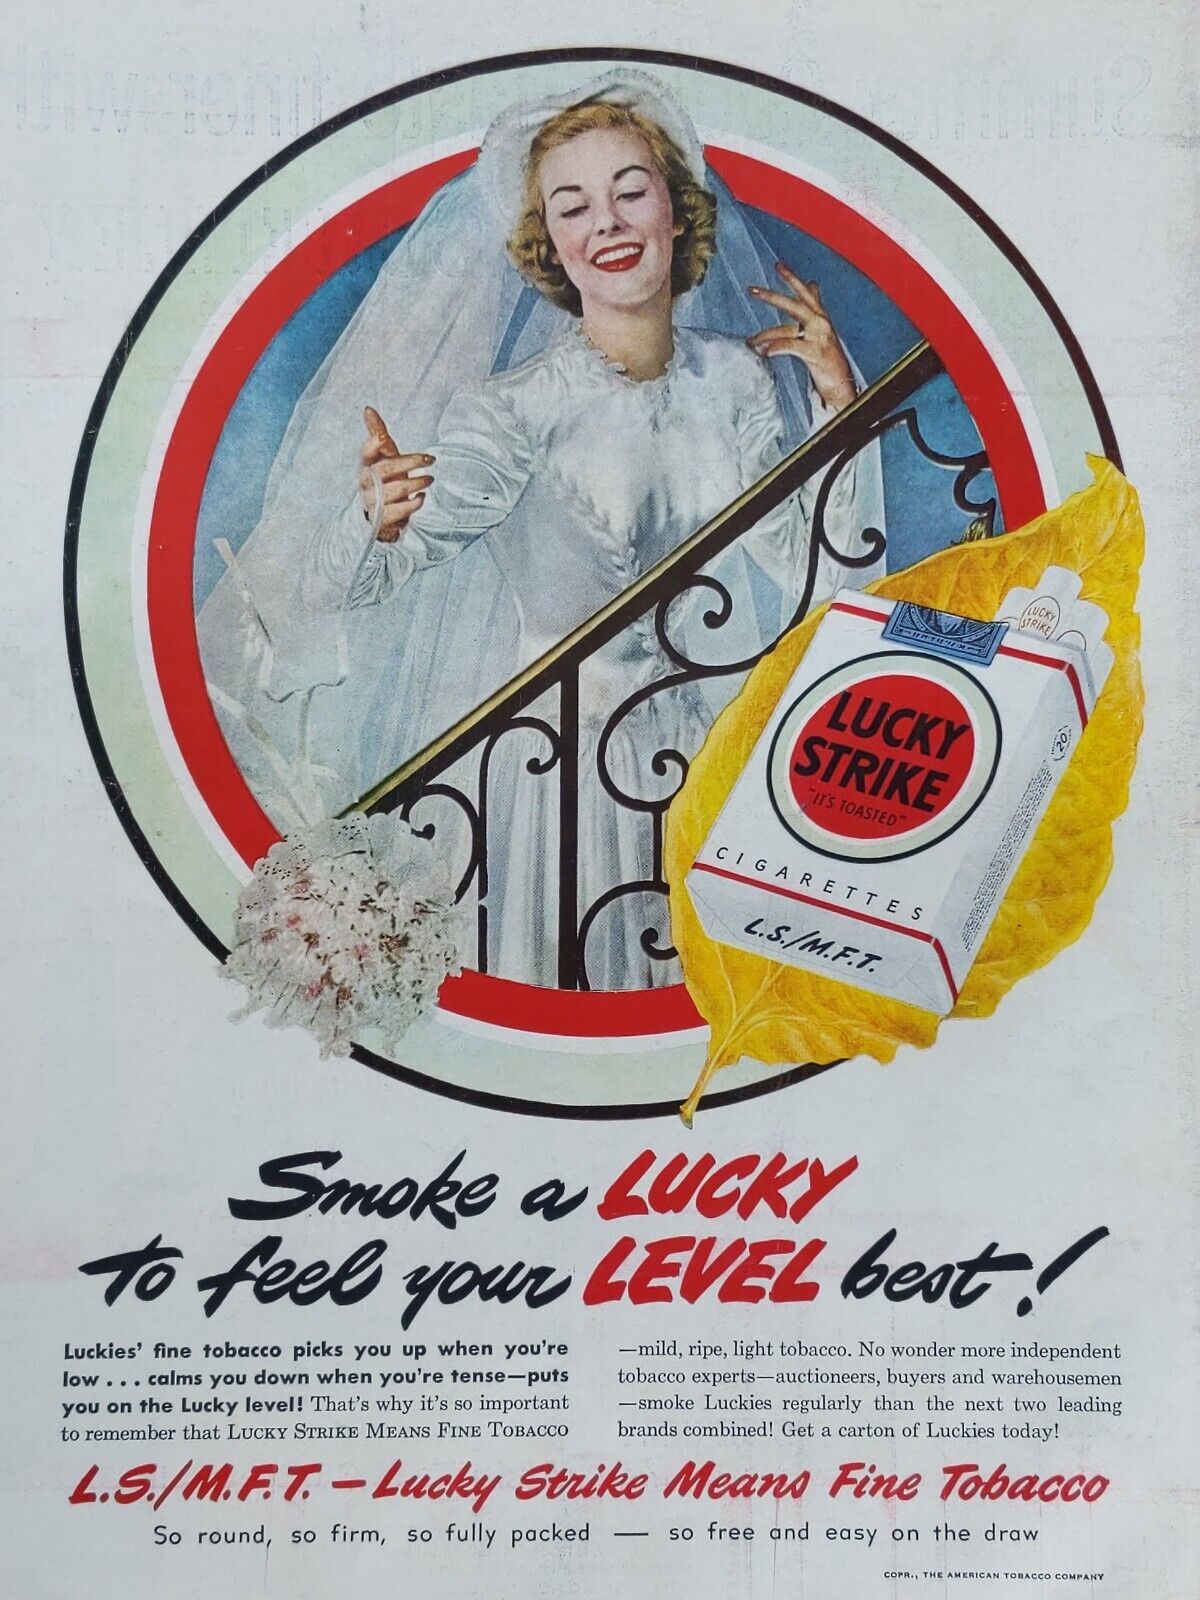 1949 vintage lucky strike print ad. Smoke a lucky to feel your level best